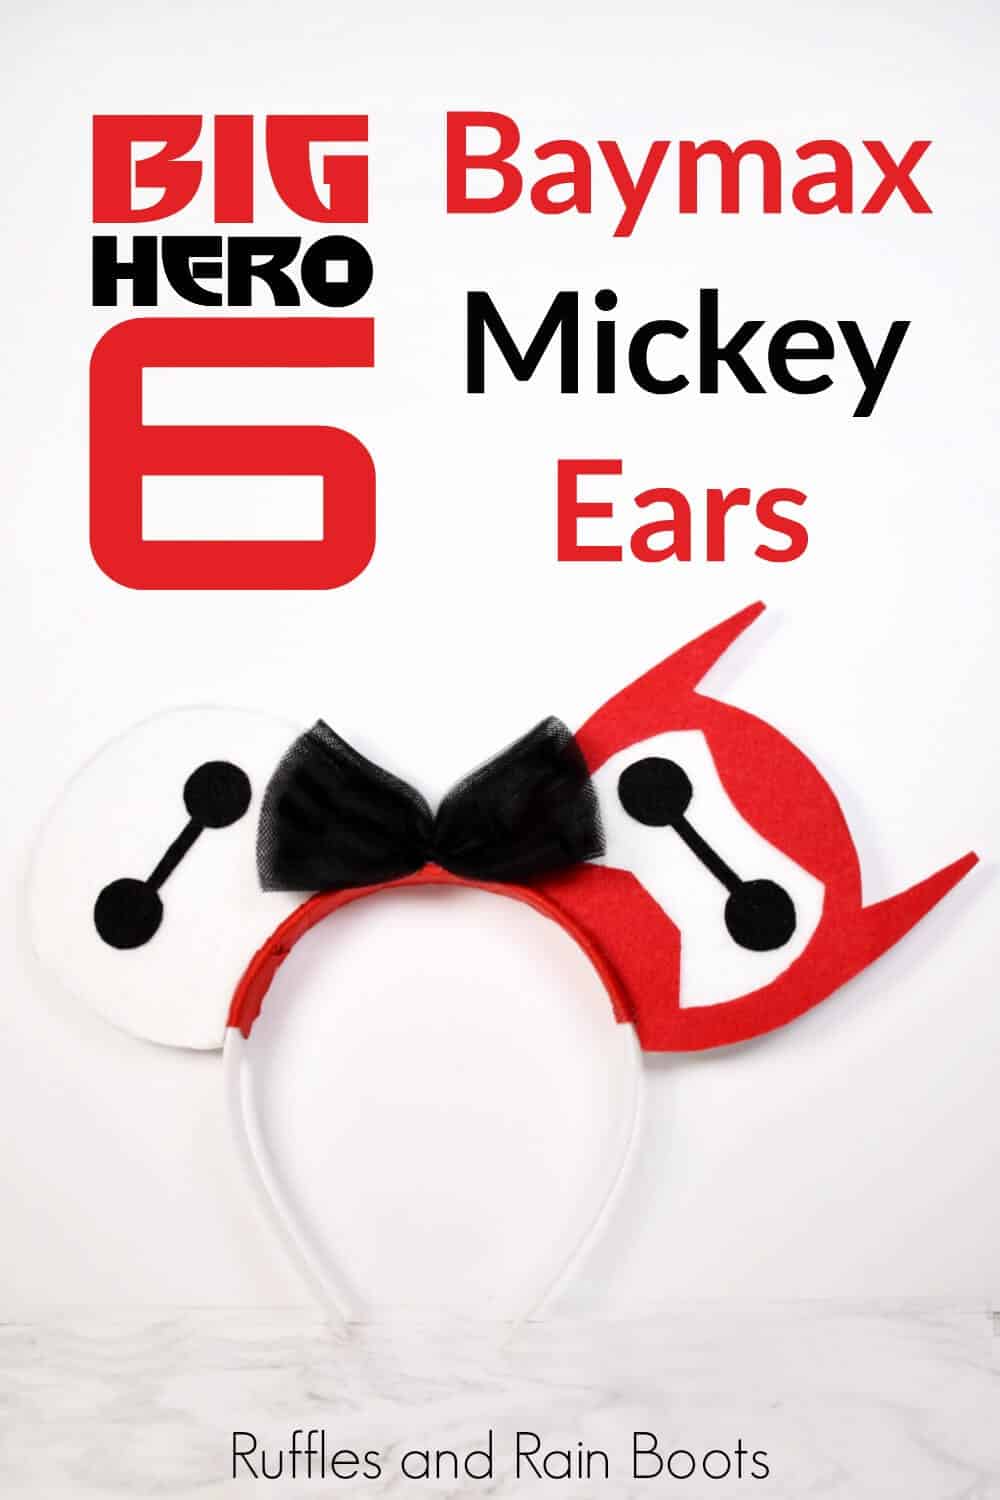 DIY mouse ears standing up on white background with text which reads Baymax Mickey Ears from Big Hero 6